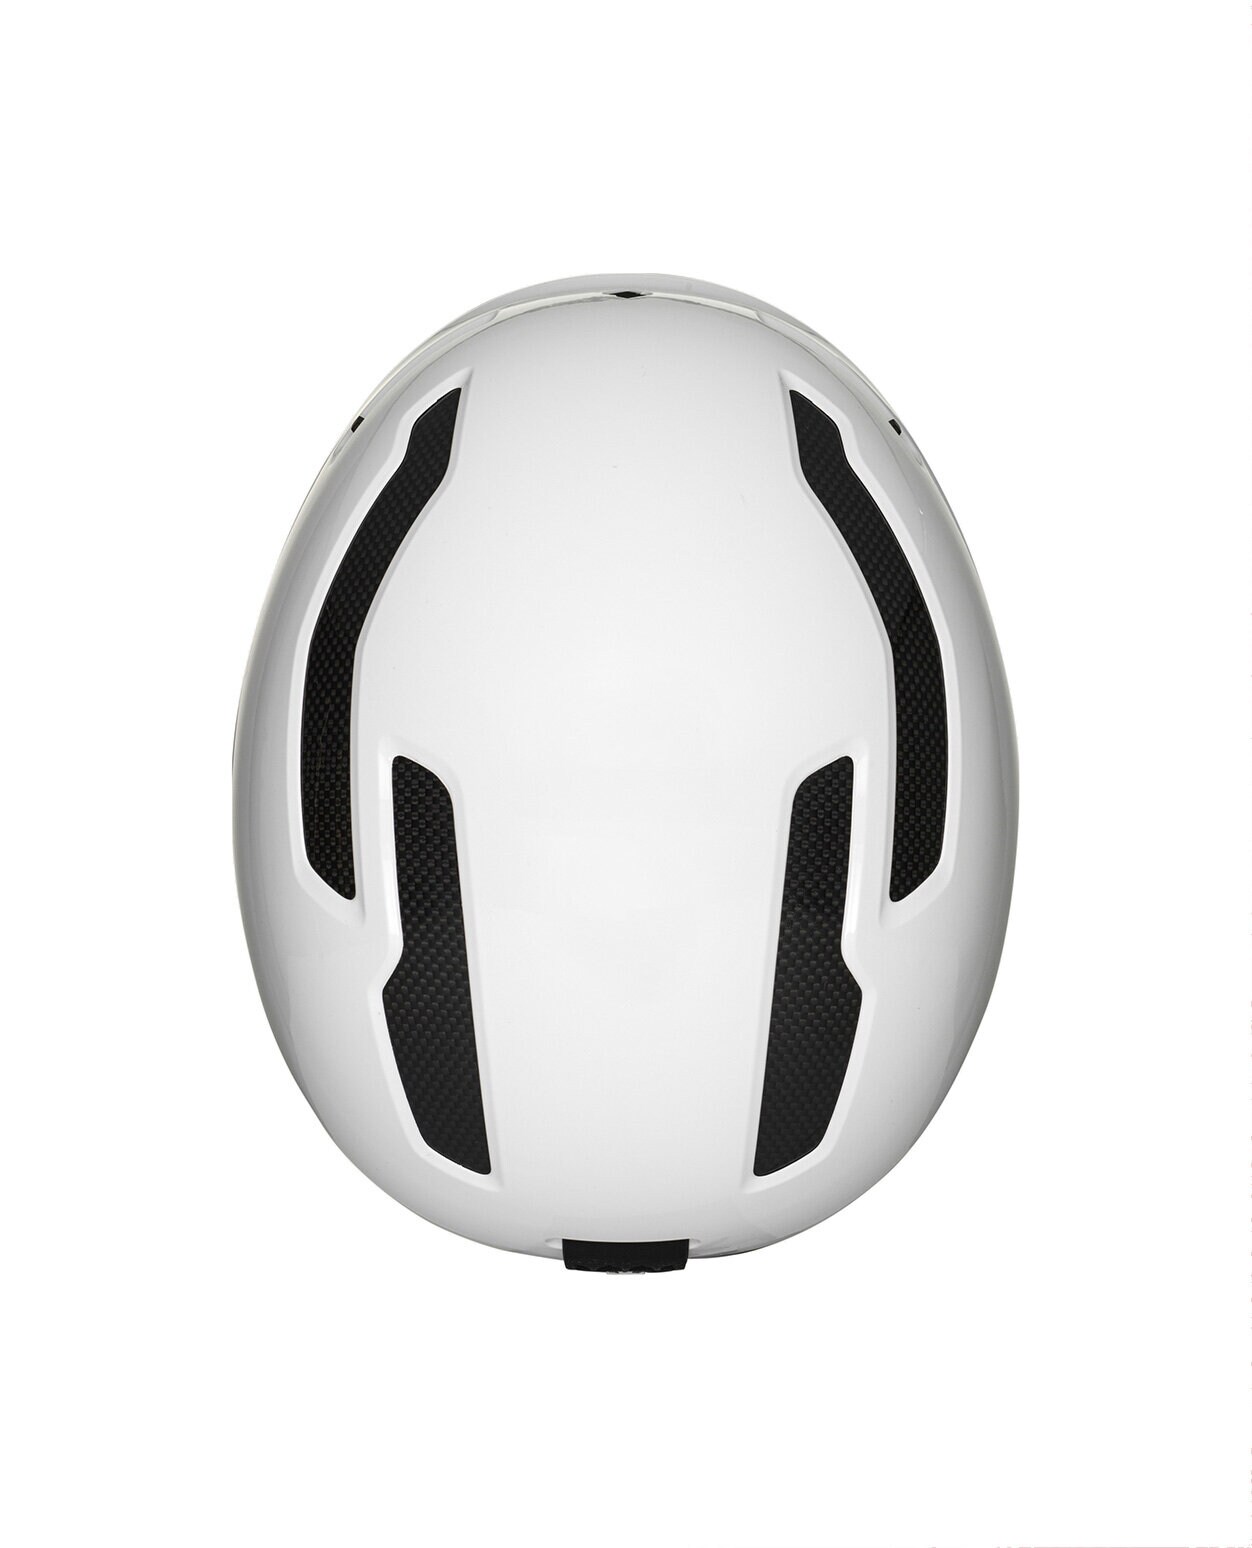 Sweet Protection Trooper 2Vi Mips Gloss White